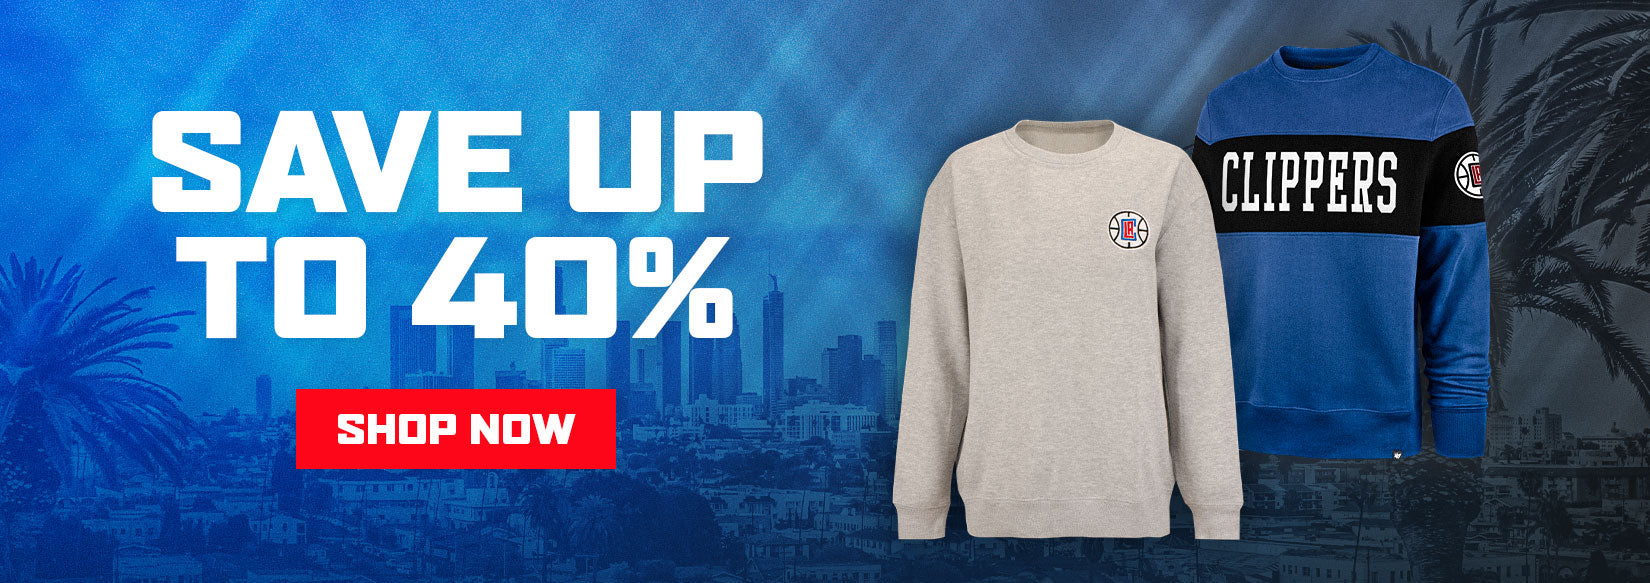 Save Up To 40% SHOP NOW